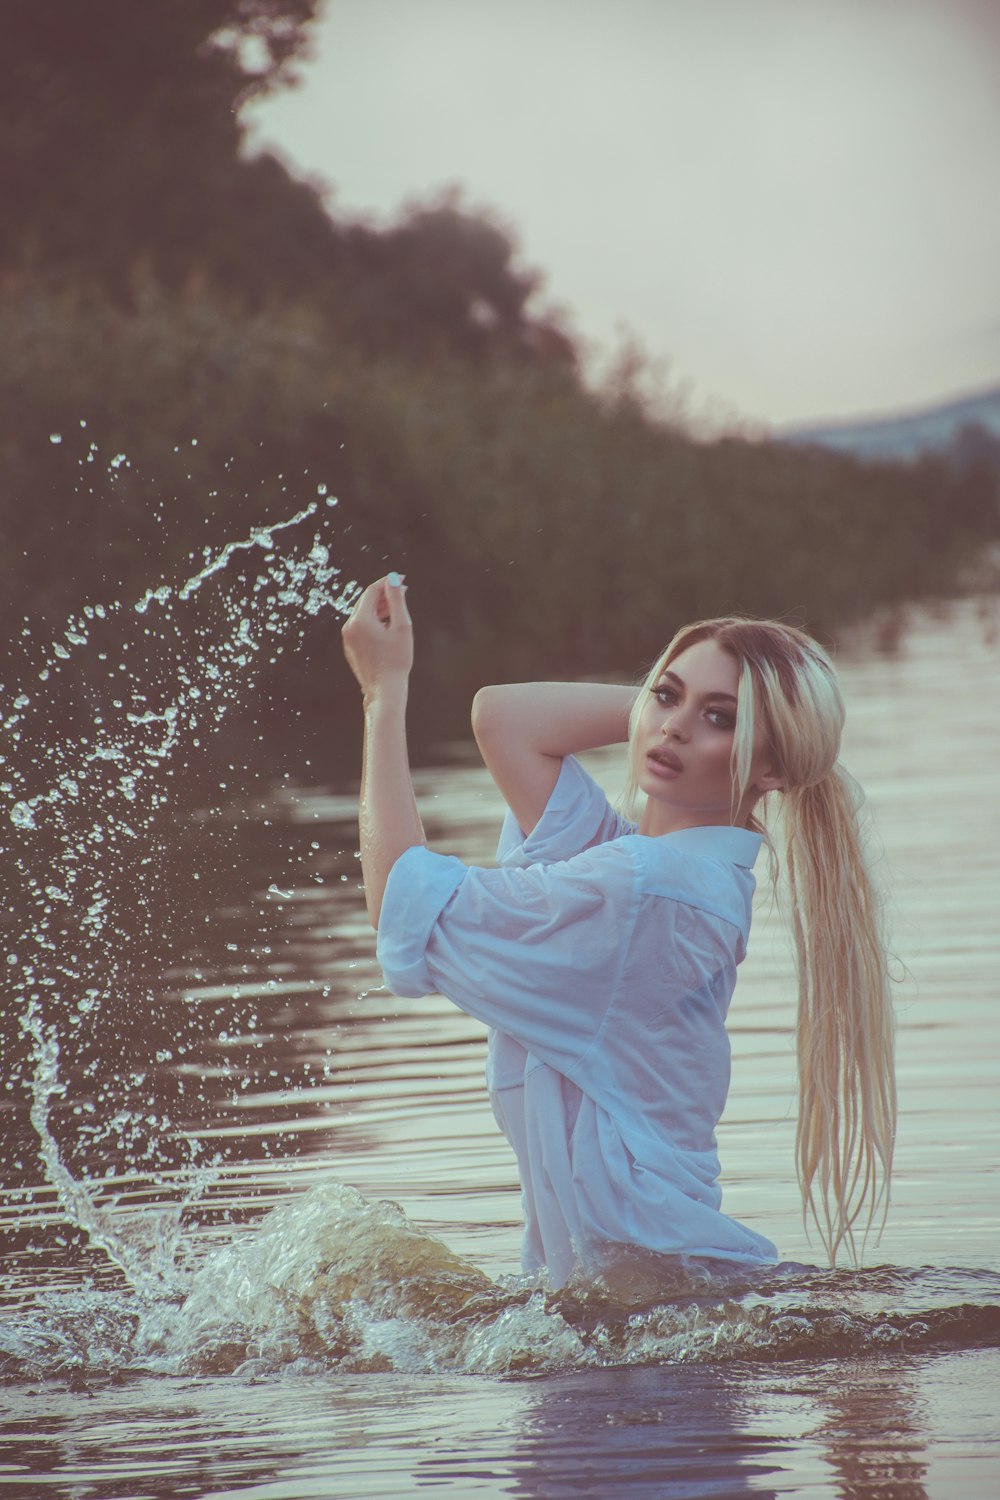 selective focus photo of woman on body of water holding her hair